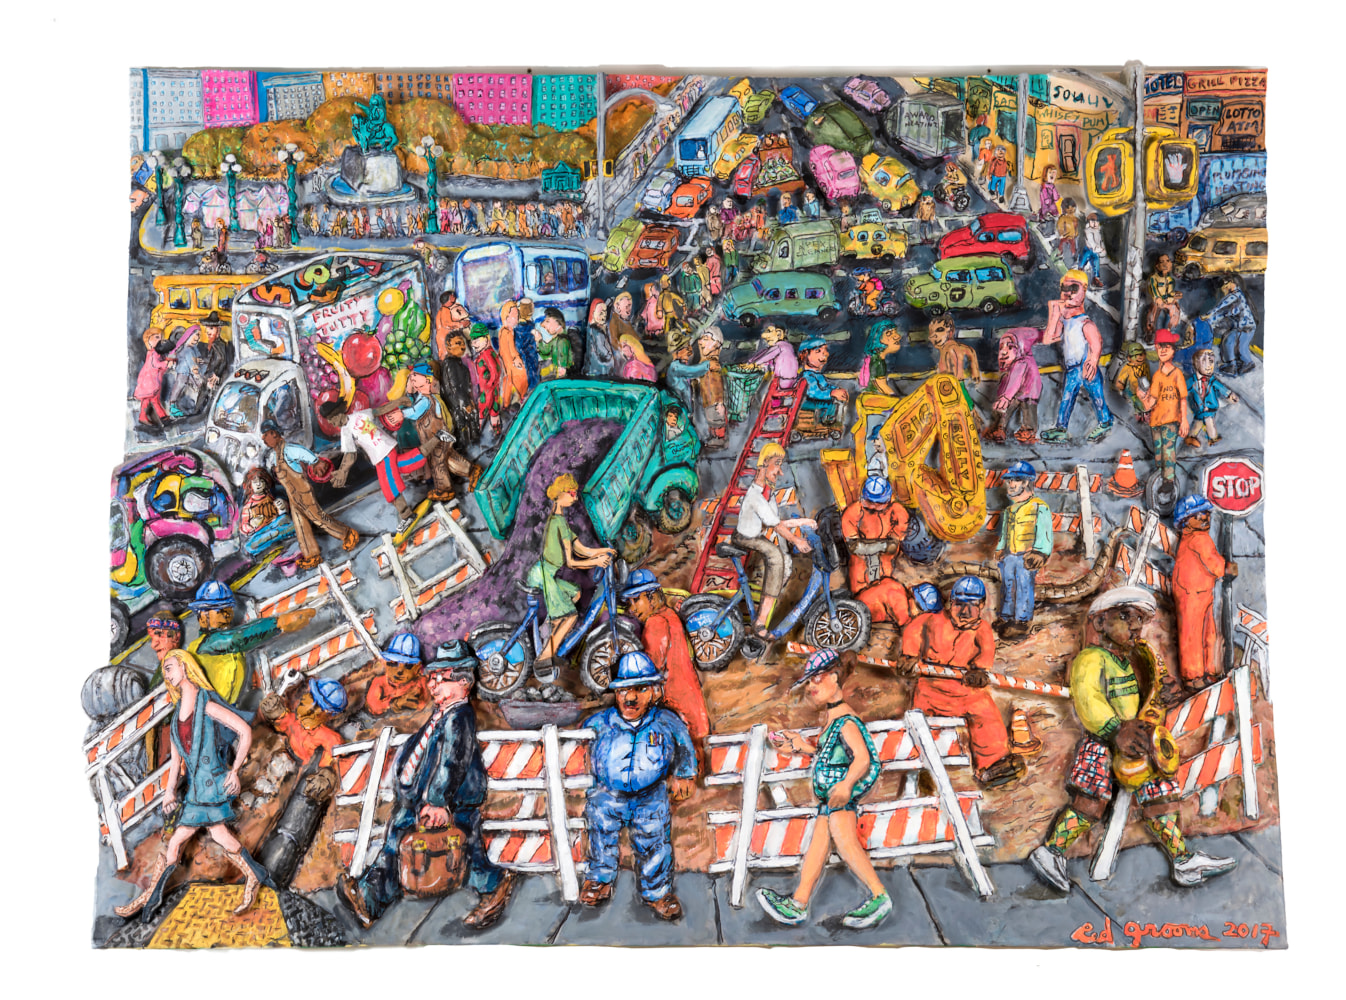 Colorful acrylic, ink, mixed media and epoxy mounted on wood work by Red Grooms featuring a bustling urban street scene with construction, people walking and car traffic